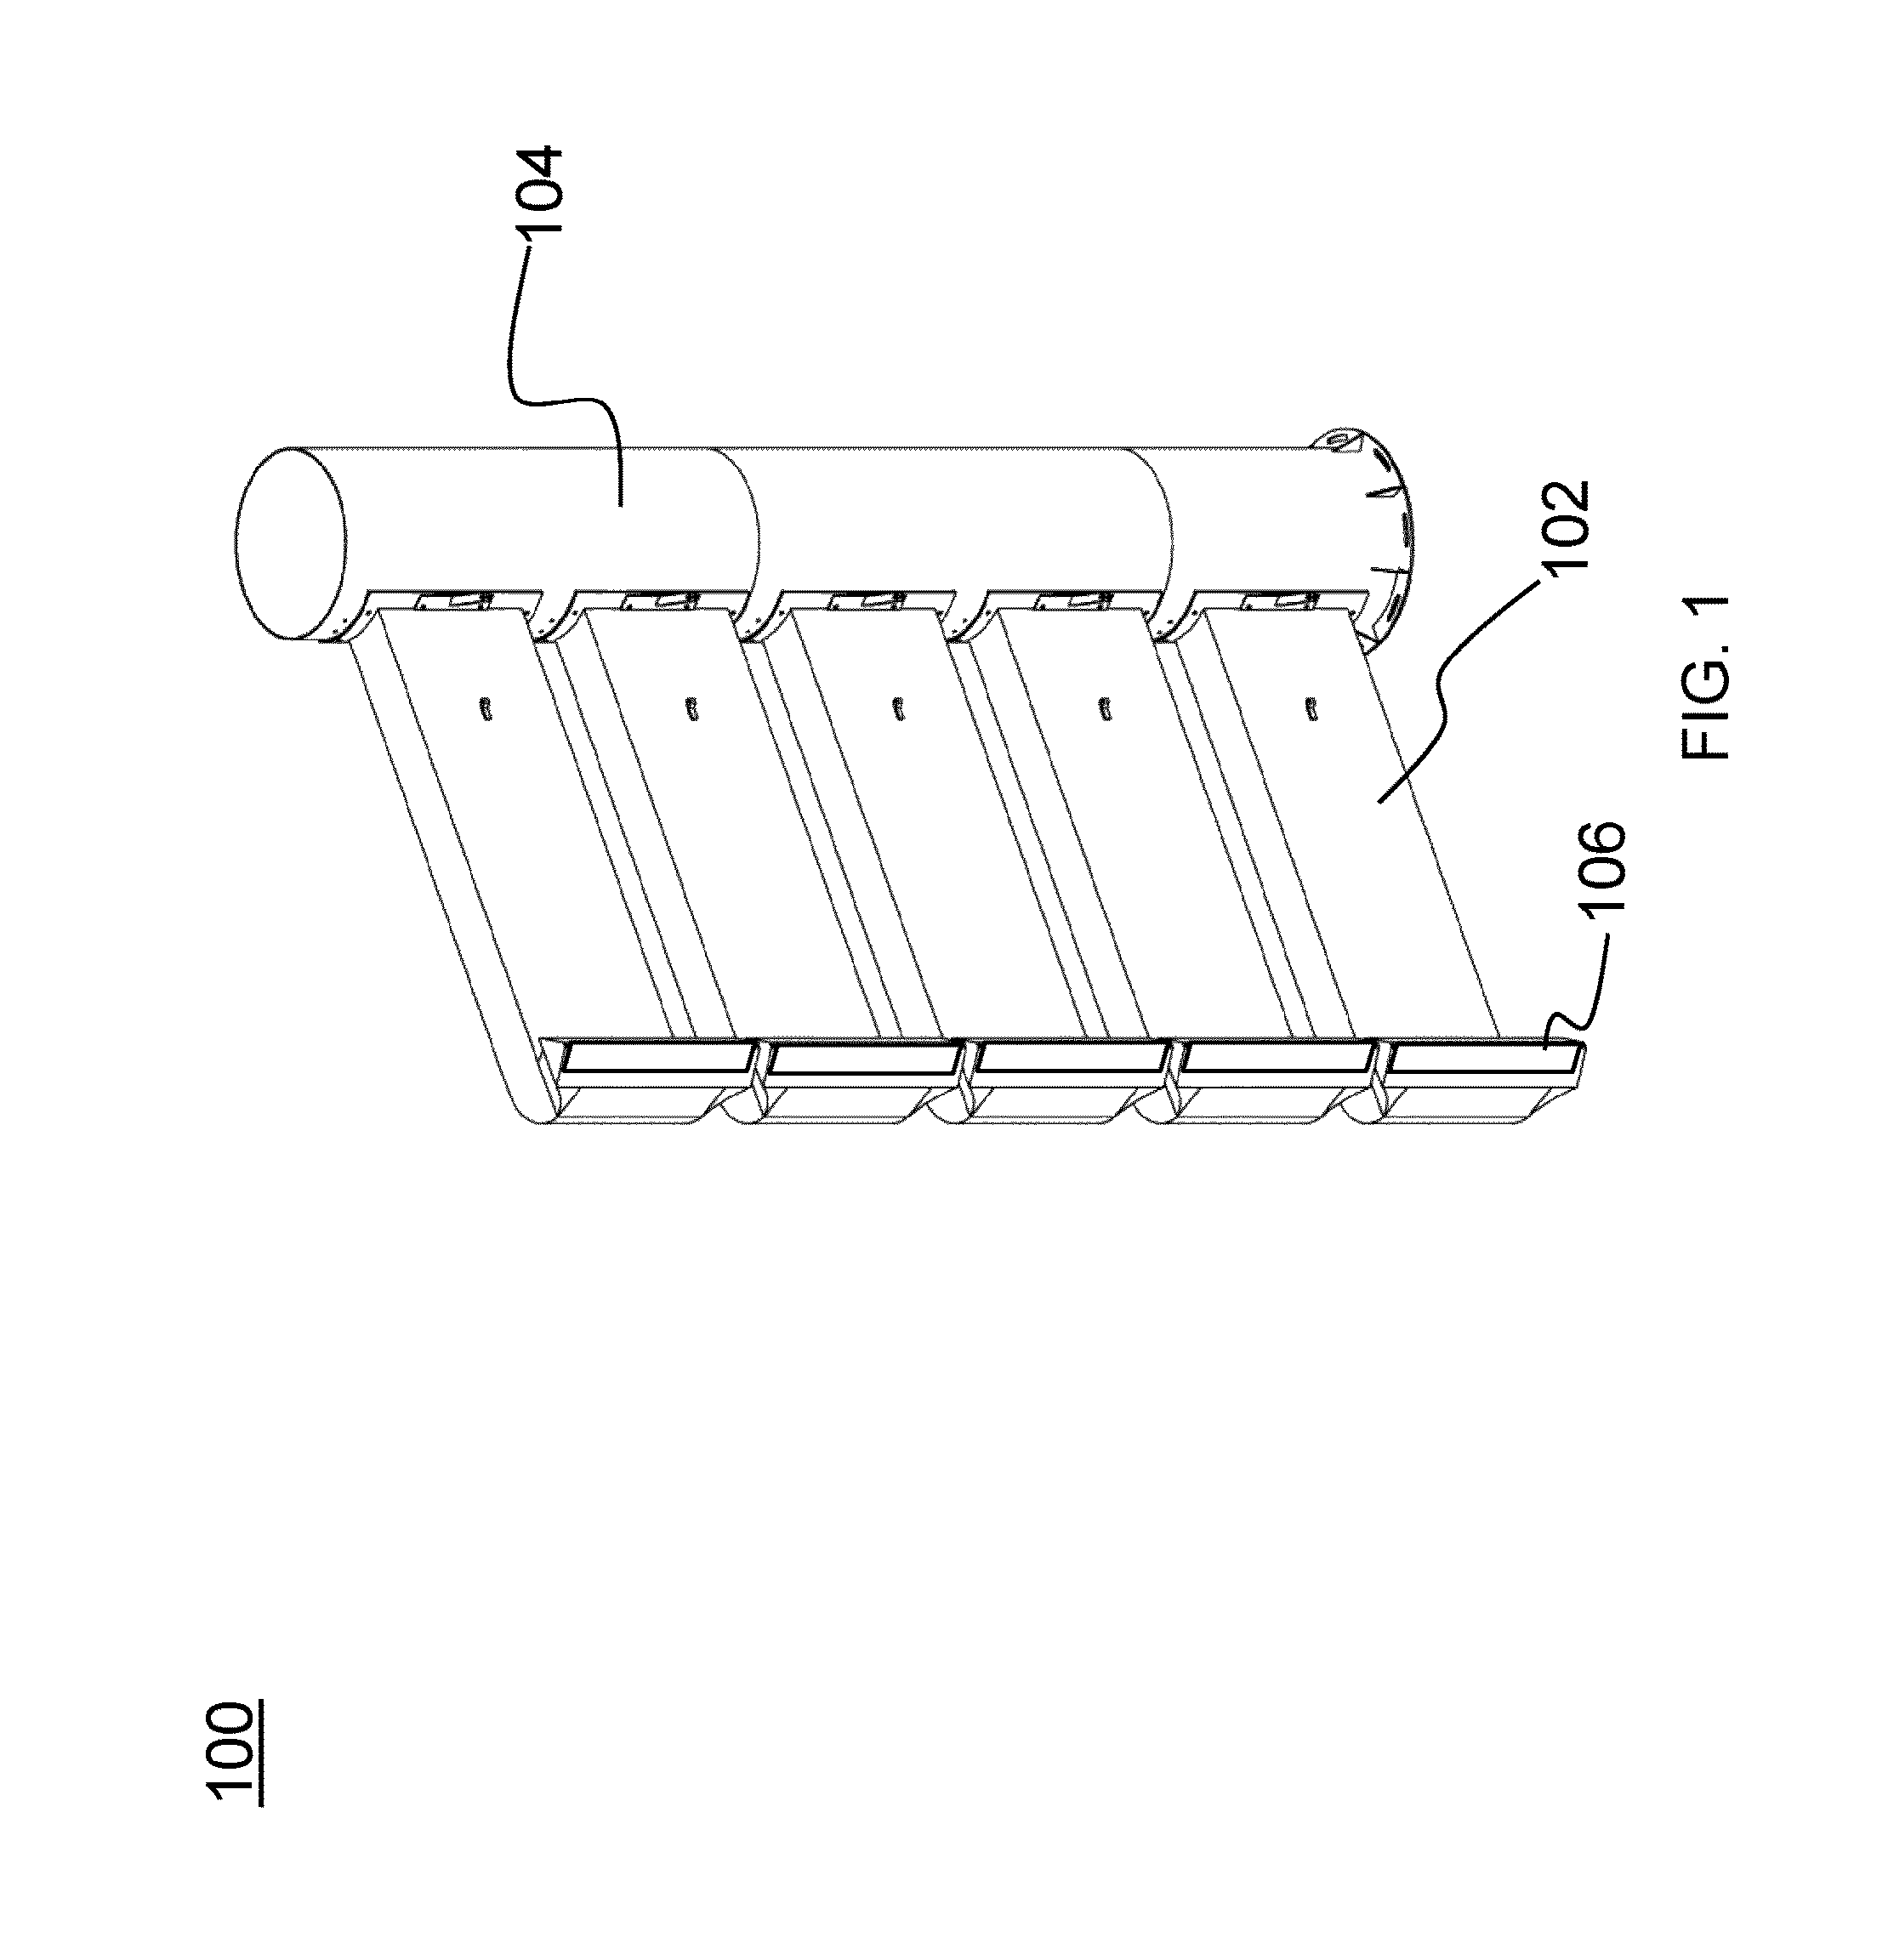 System and apparatus for stripping fluids from the surface of a vehicle